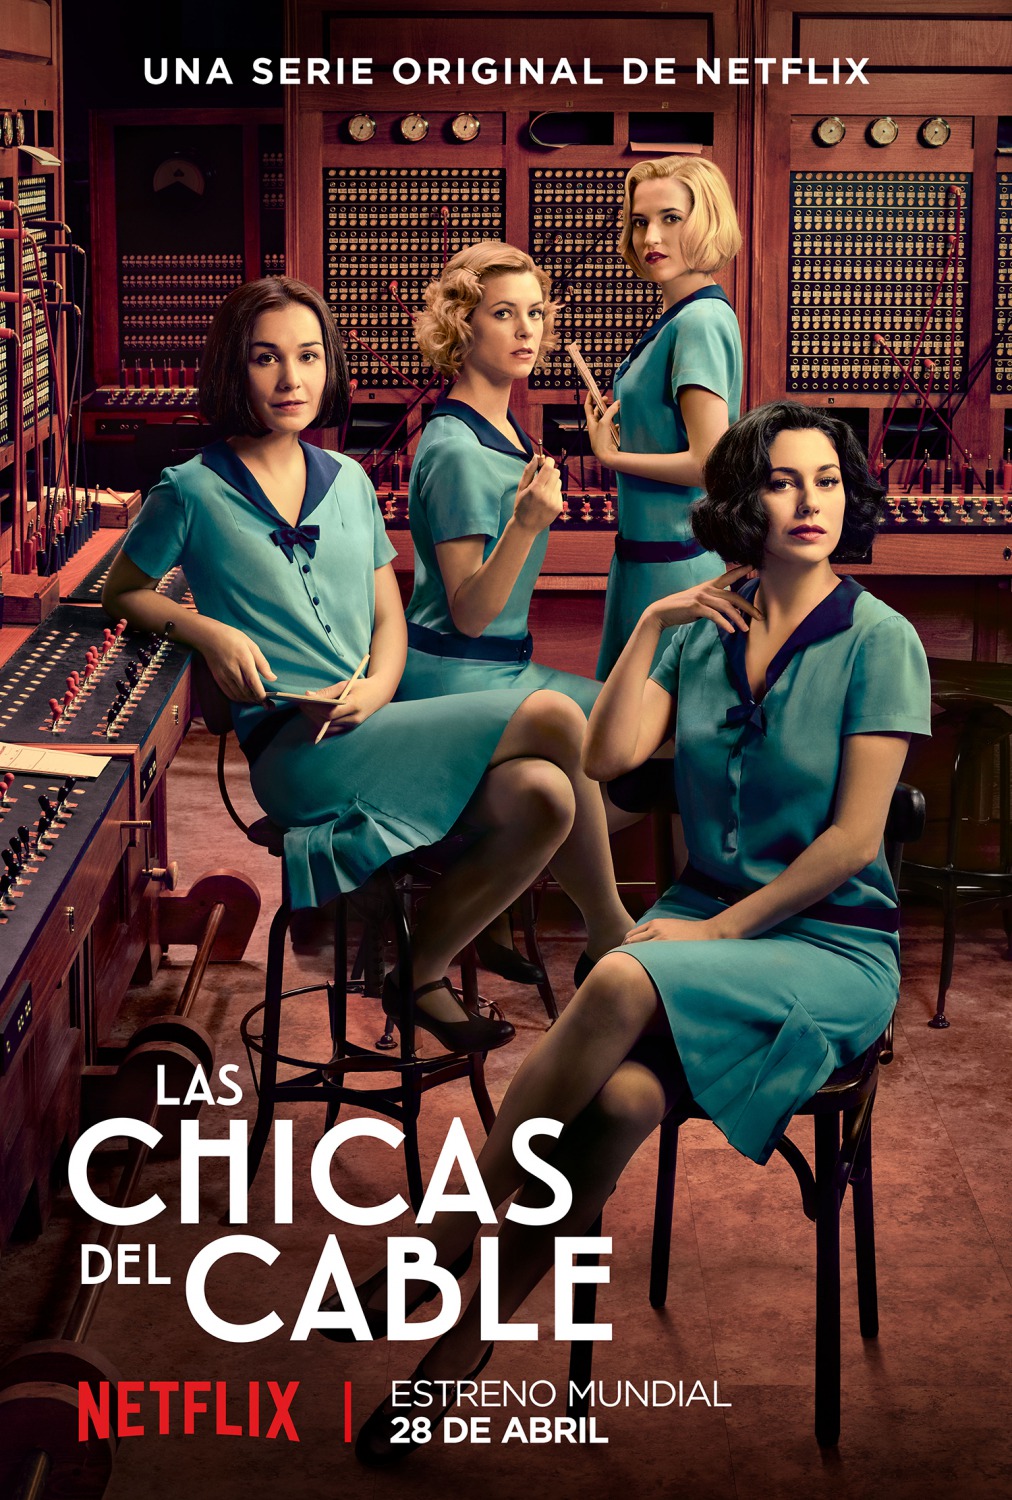 Extra Large TV Poster Image for Las chicas del cable (#1 of 7)